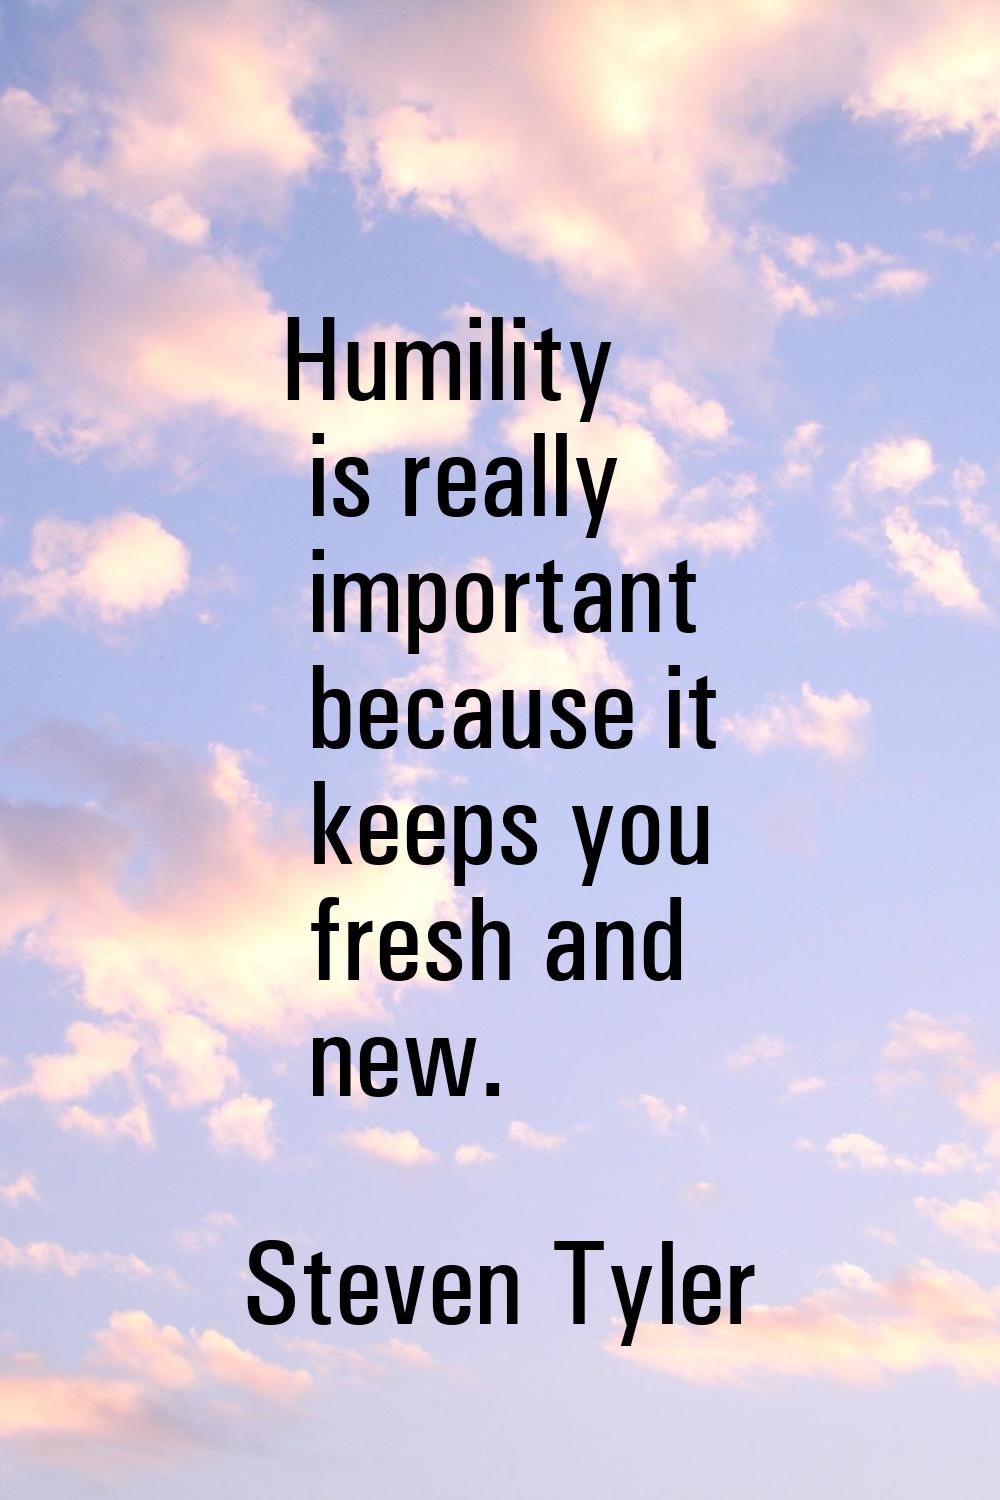 Humility is really important because it keeps you fresh and new.